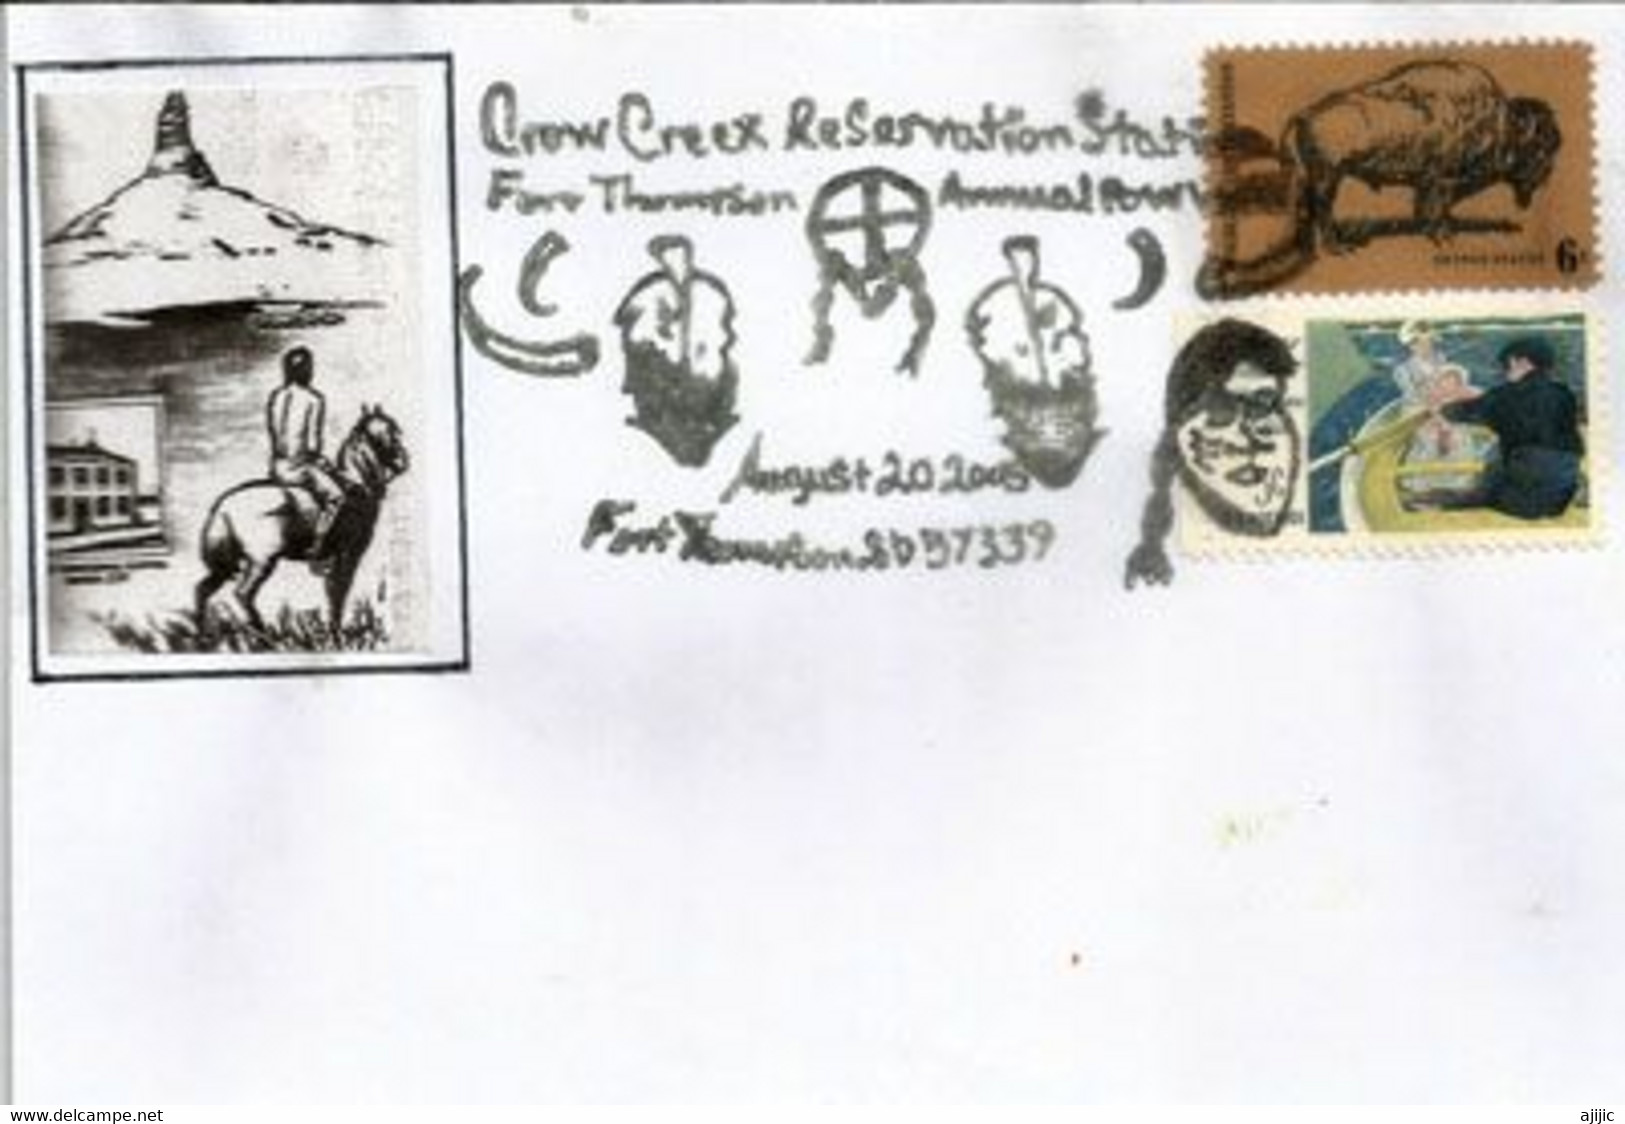 Crow Creek Indian Reservation. Fort Thompson, South Dakota. USA.  Letter - American Indians